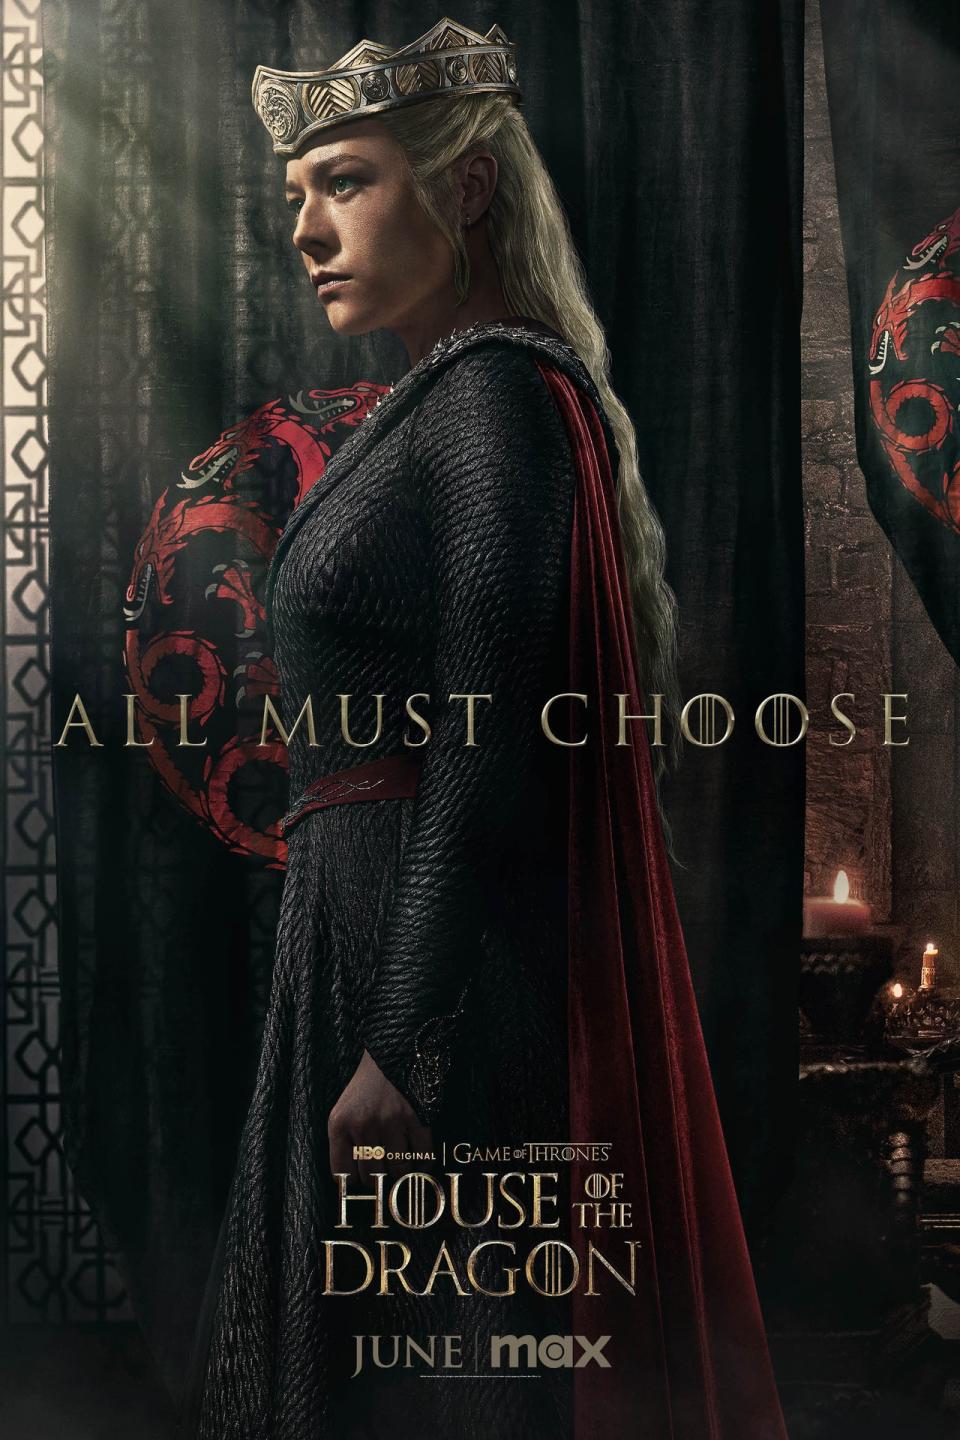 A poster for House of the Dragon Season 2 featuring Rhaenyra